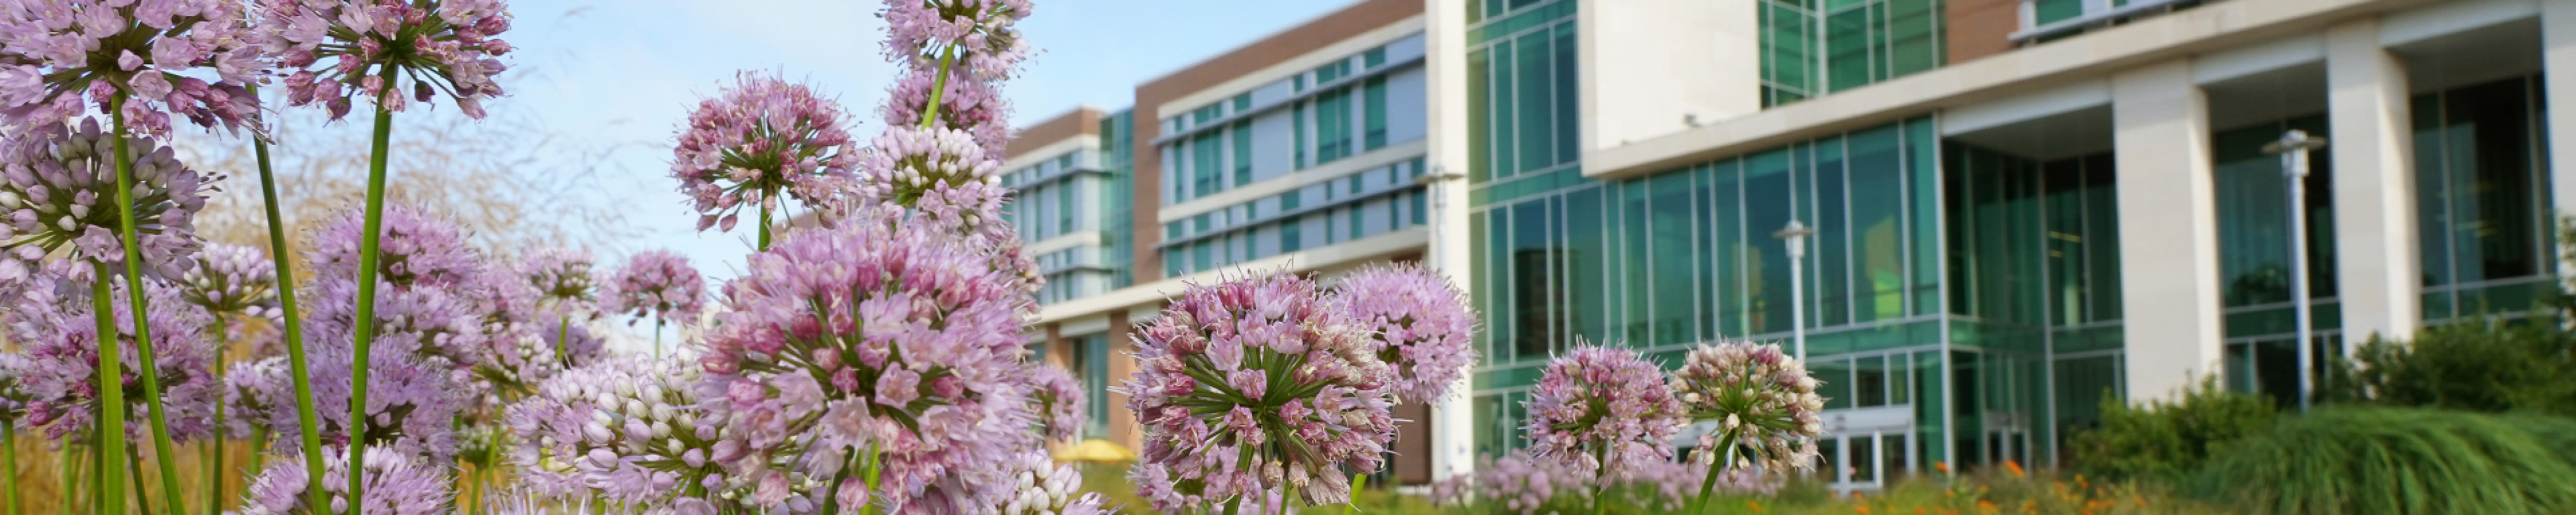 Flowers blooming on campus